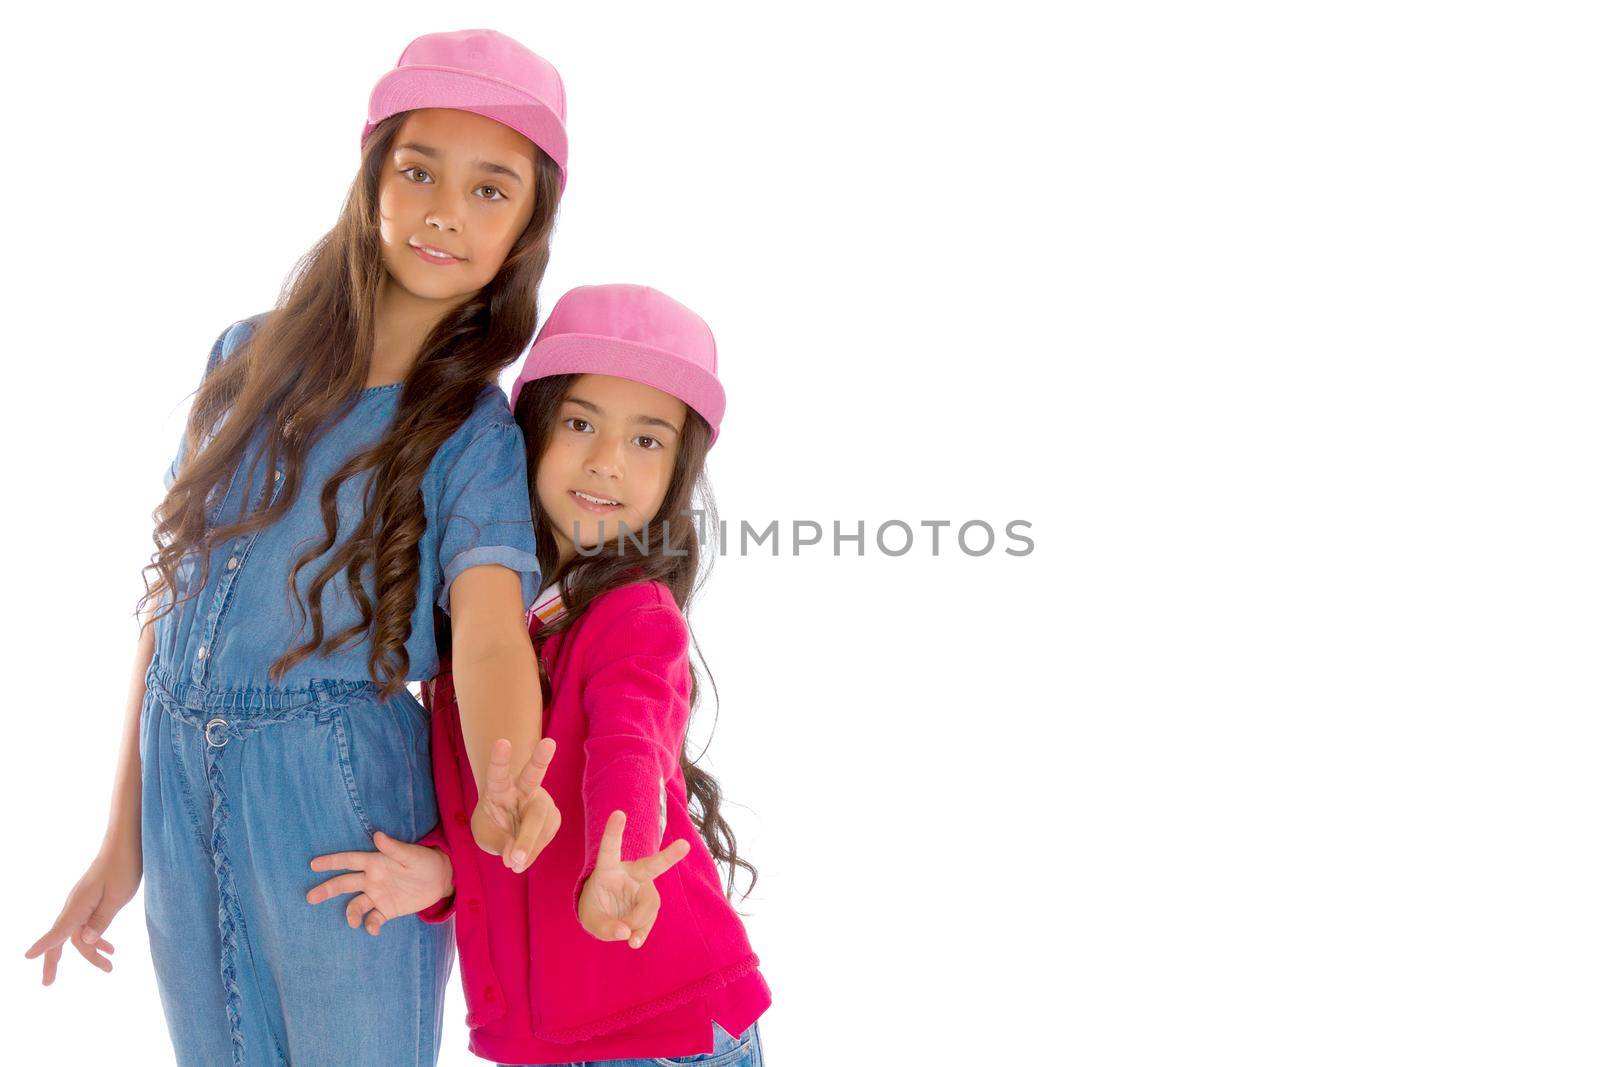 Two cheerful Asian girls show a gesture victoria. The concept of a happy childhood. Isolated on white background.